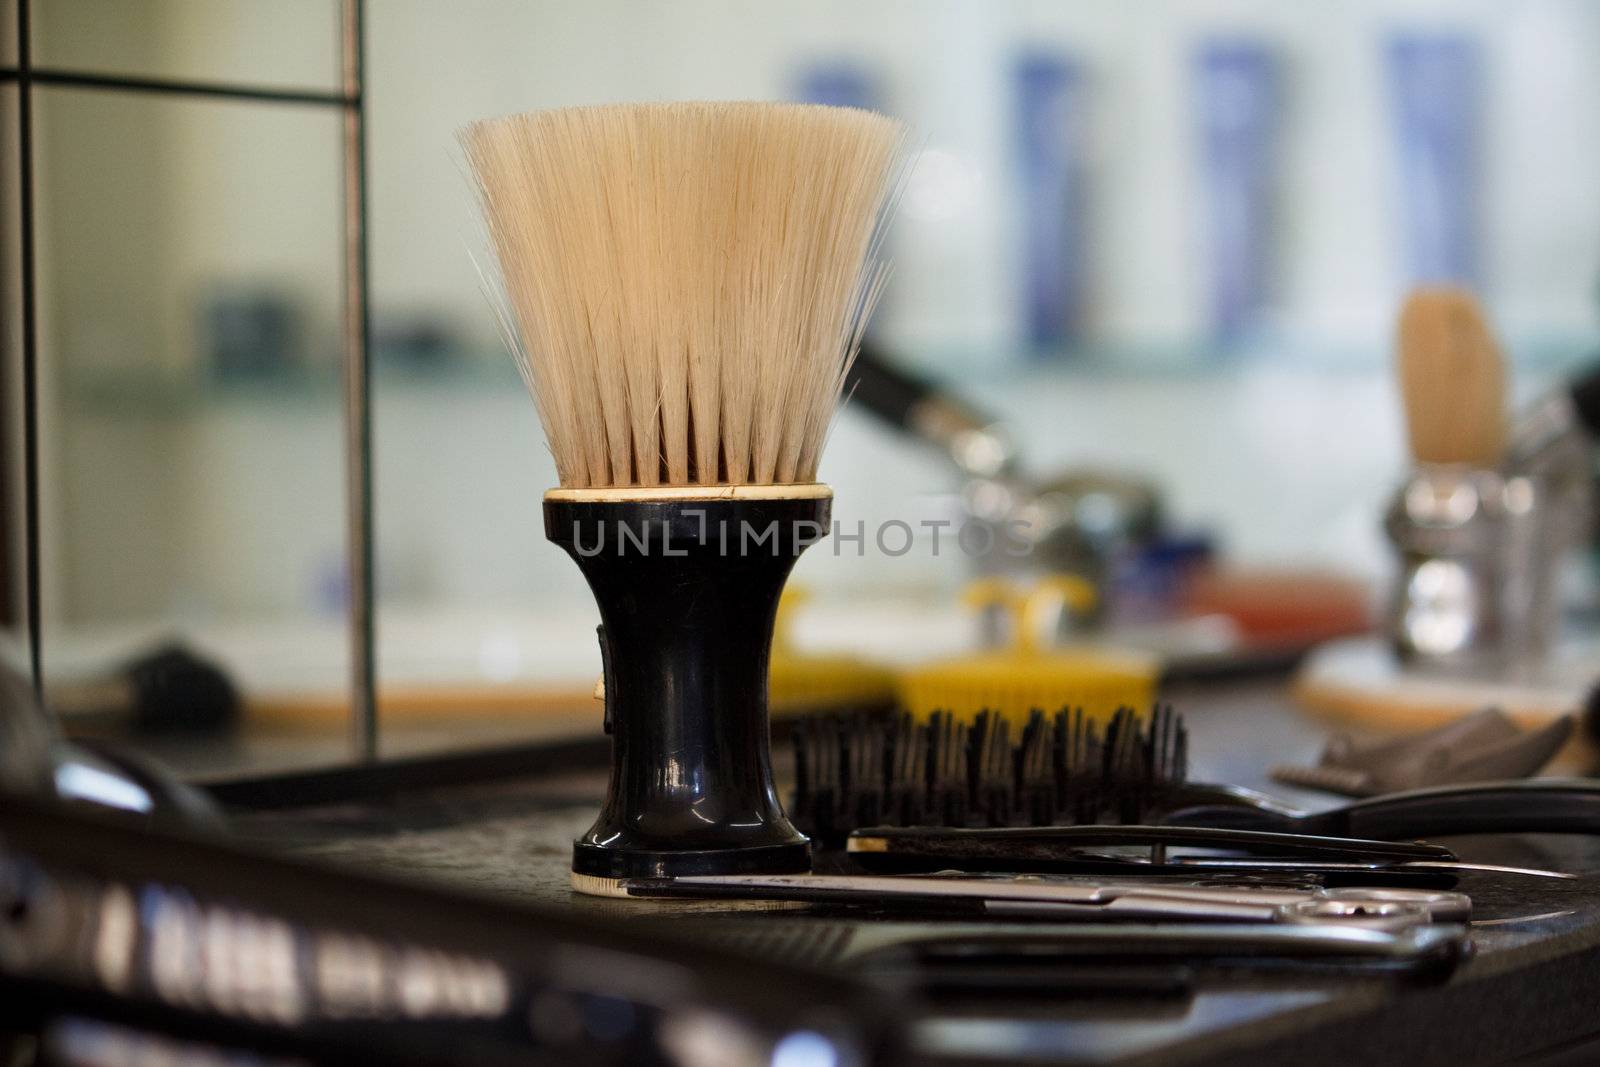 Barber supplies by FedericoPhoto